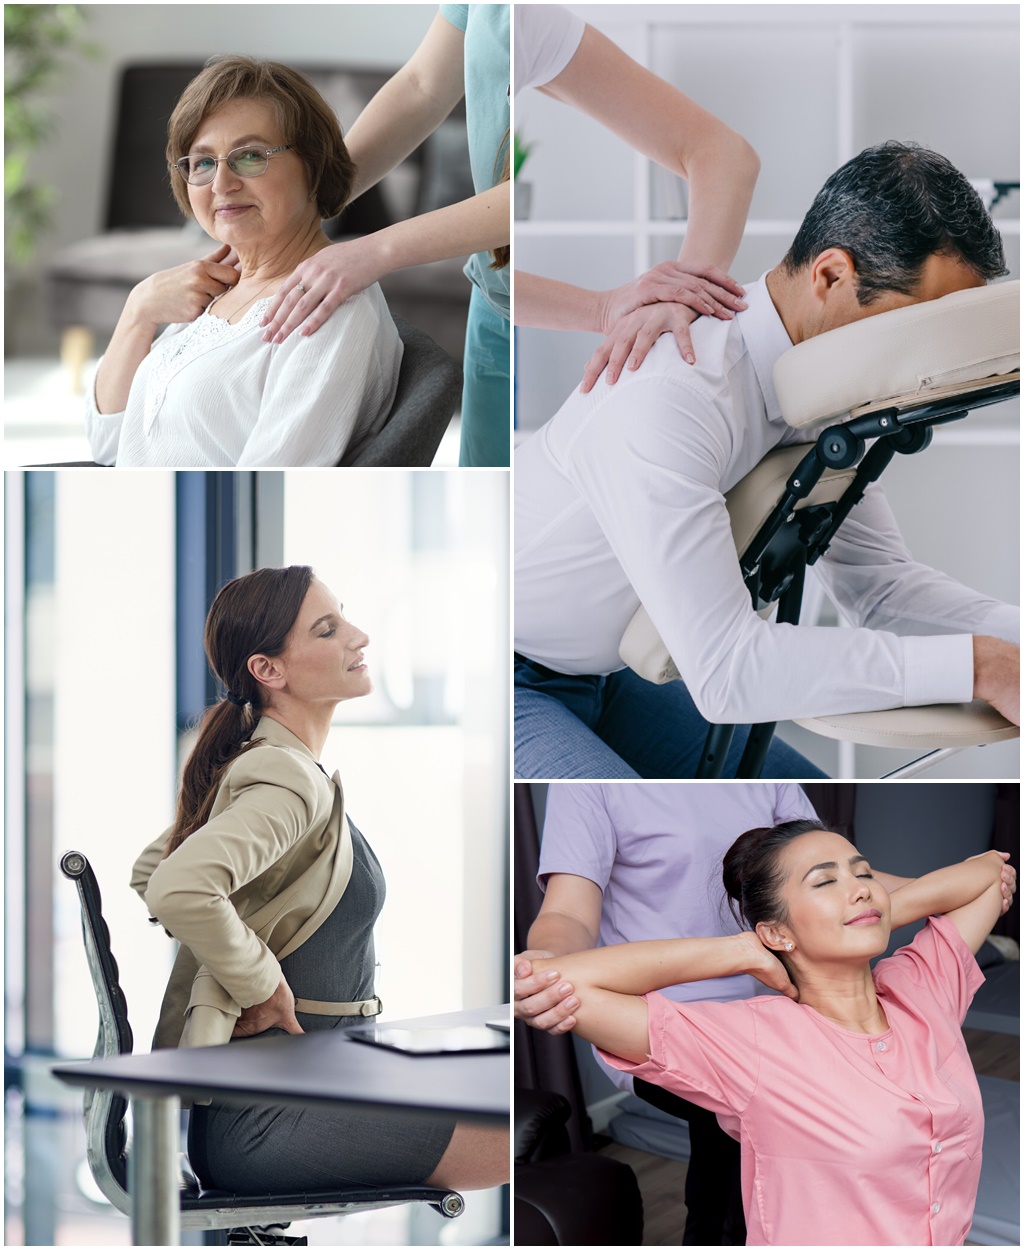 Massage therapy for well being in the workplace - Warrington, Cheshire